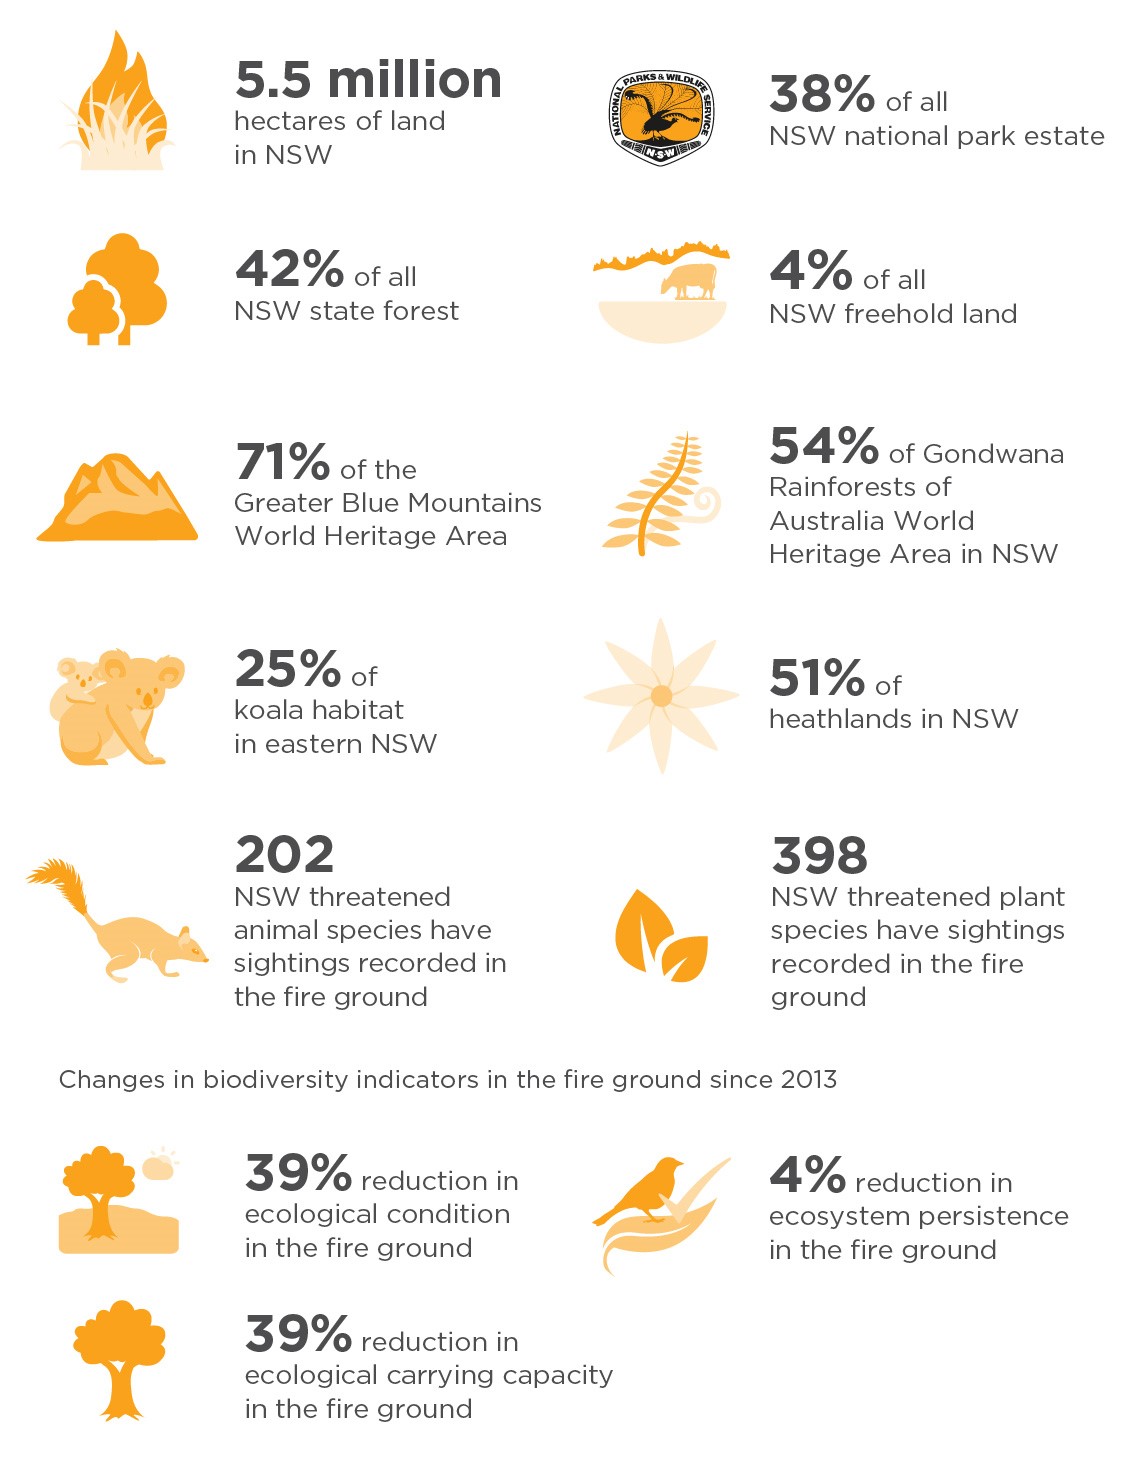 The image is an infographic about New South Wales (NSW), Australia. It shows land and wildlife stats. For example, NSW owns 42% of state forests and 4% of parks. It also has 71% of the Greater Blue Mountains World Heritage Area and 54% of freehold lands. In wildlife, 25% of koalas live in eastern NSW, and 51% of heathlands are in NSW. The data also reveals threats to biodiversity. Since 2013, 212 animal species and 398 plant species have been at risk. However, plant species in fire zones have decreased. 